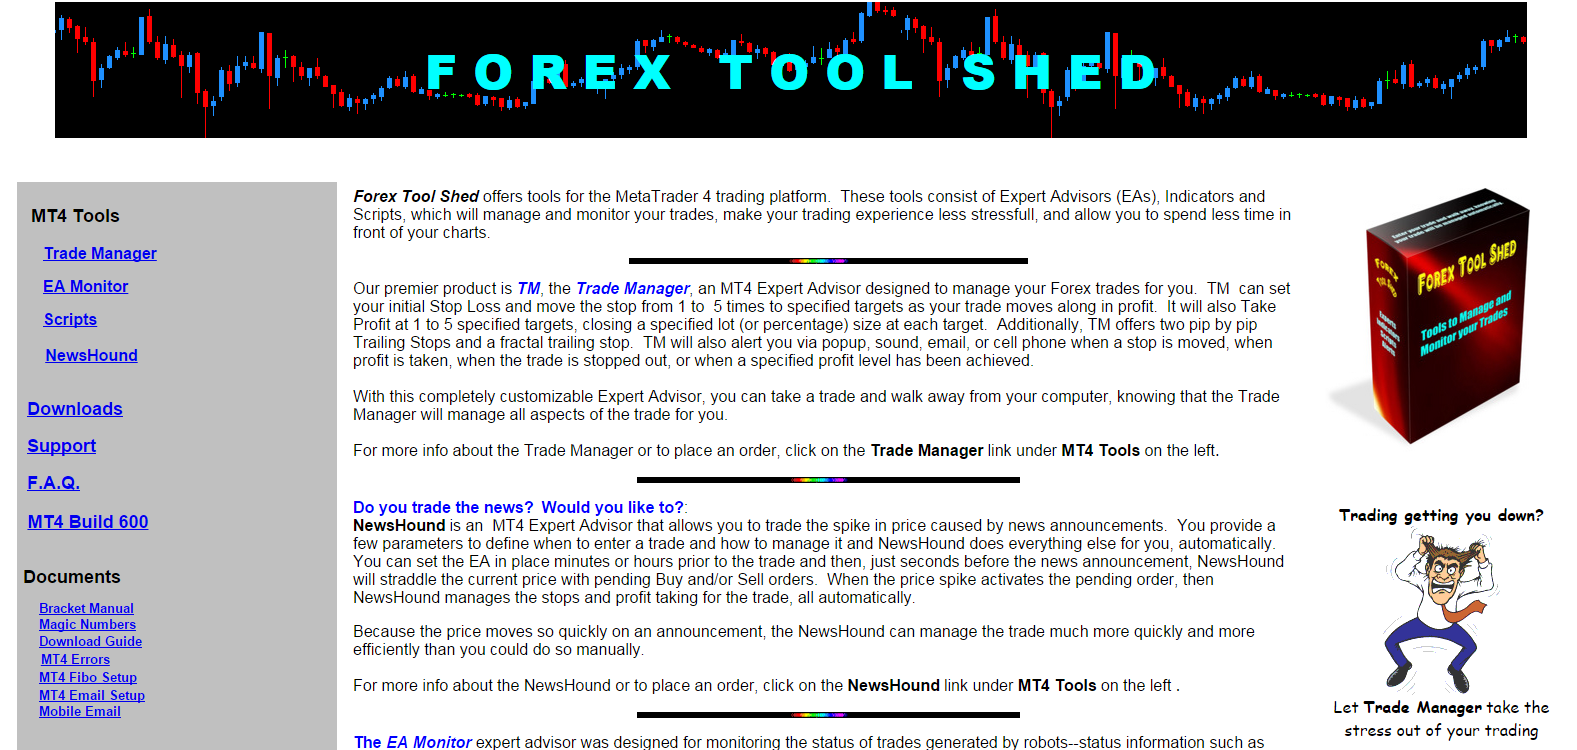 Best forex tools